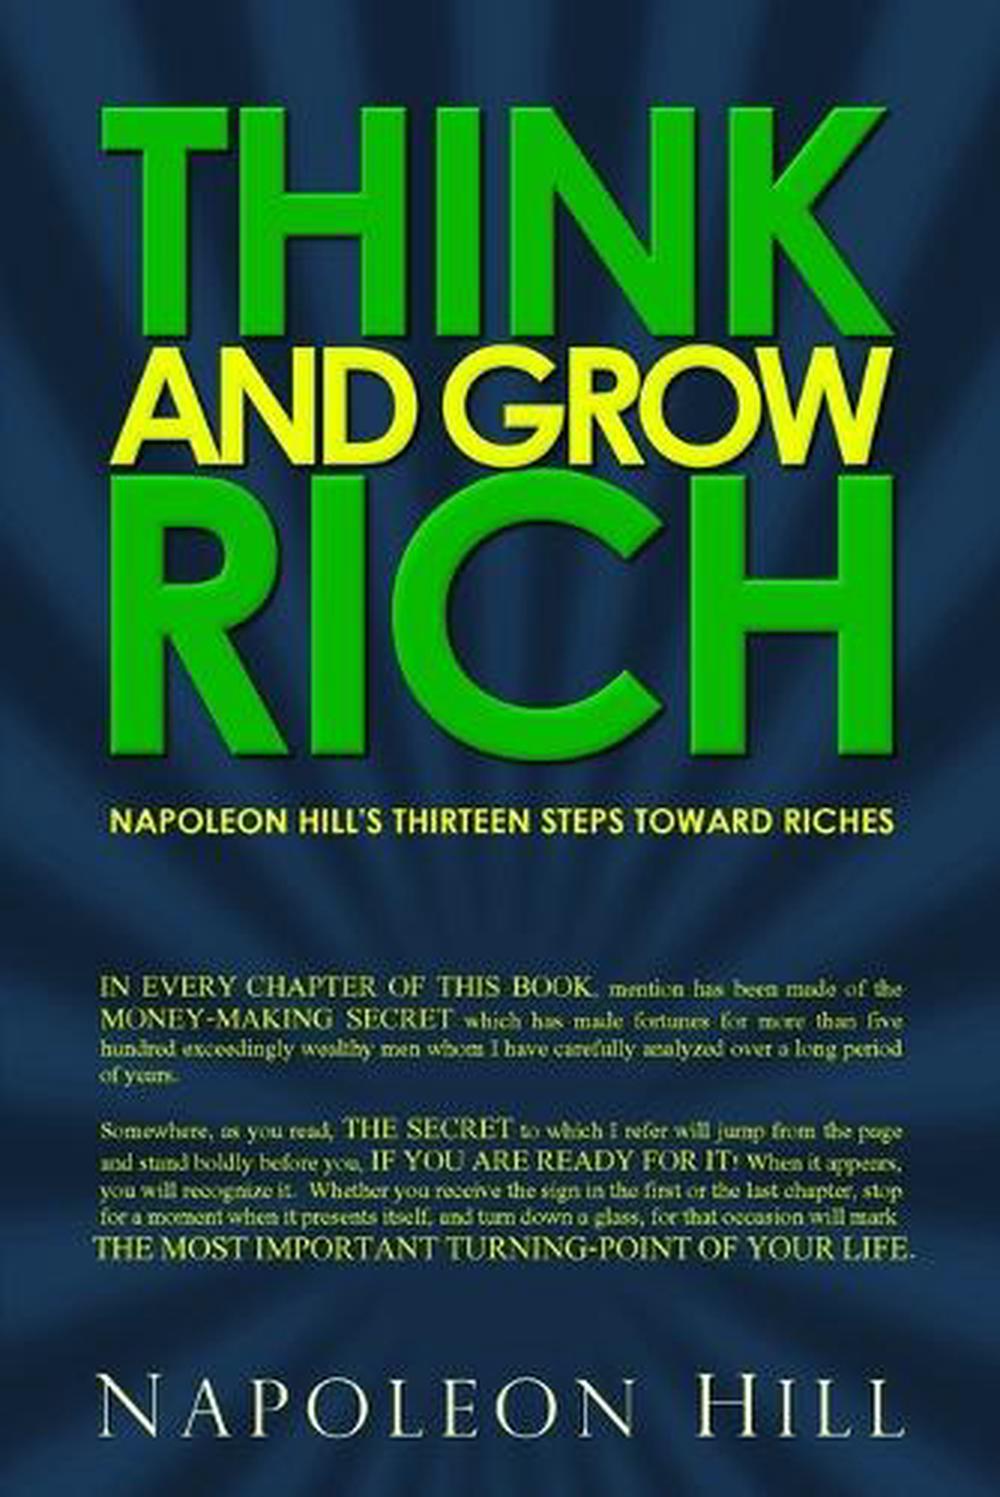 Think and grow Rich книга. Napoleon Hill think and grow Rich book. Наполеон Хилл книги. Think and grow Rich Cover book. Рич книги